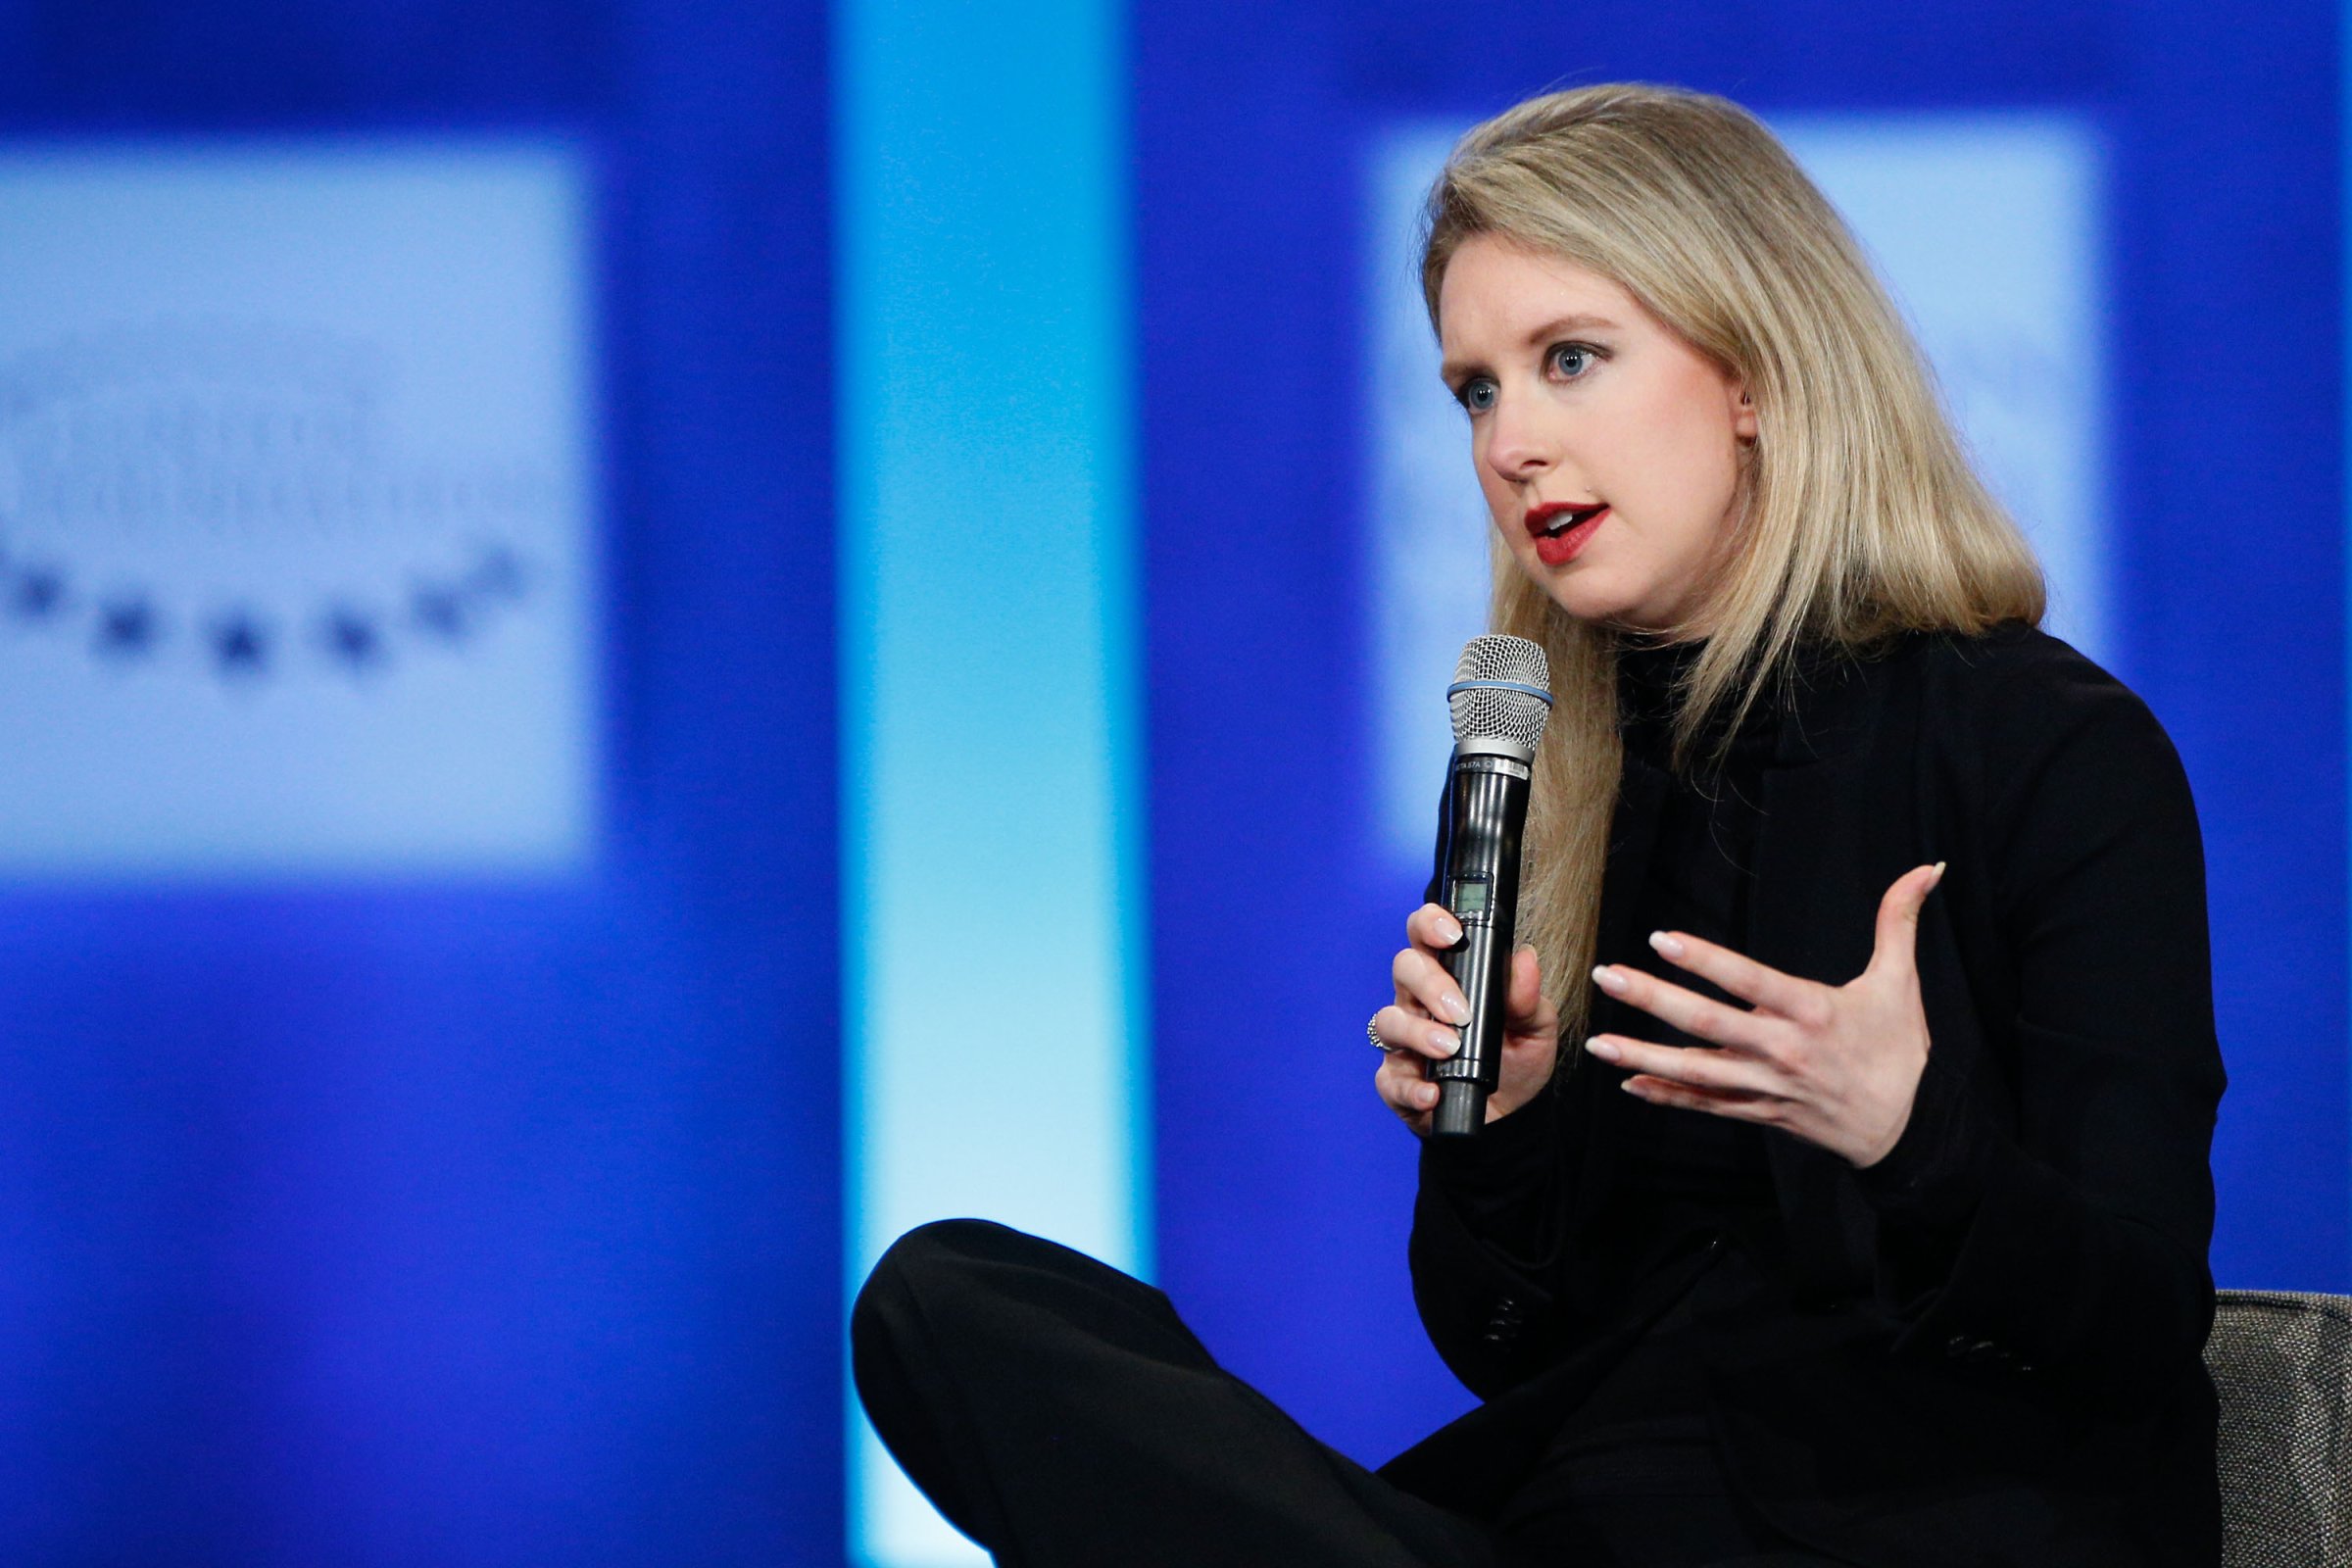 Elizabeth Holmes speaks on stage during the closing session of the Clinton Global Initiative 2015 in New York City on Sept. 29, 2015.